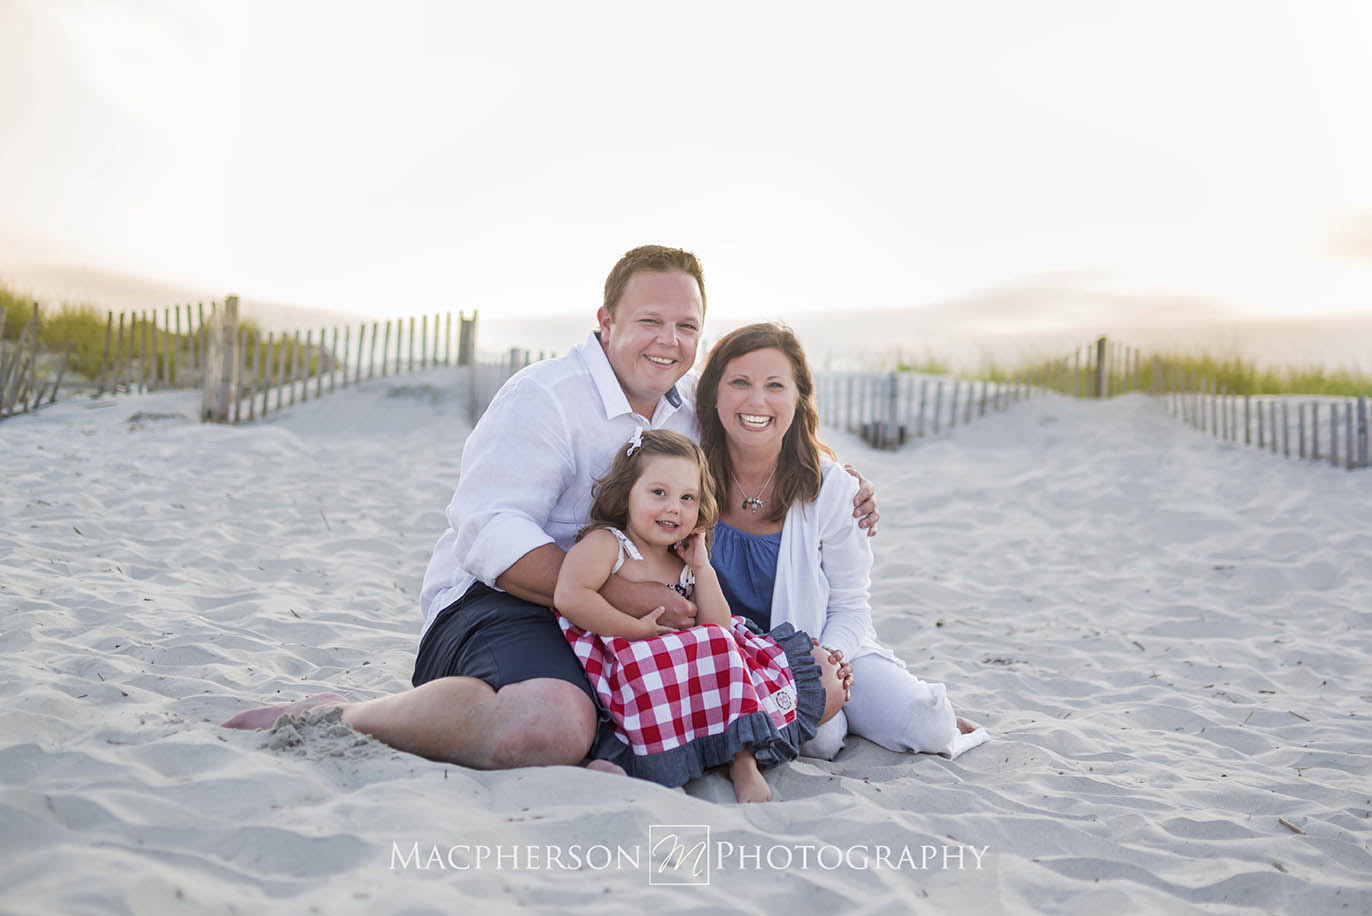 The Best Family Beach Photographer in Sea Isle City New Jersey